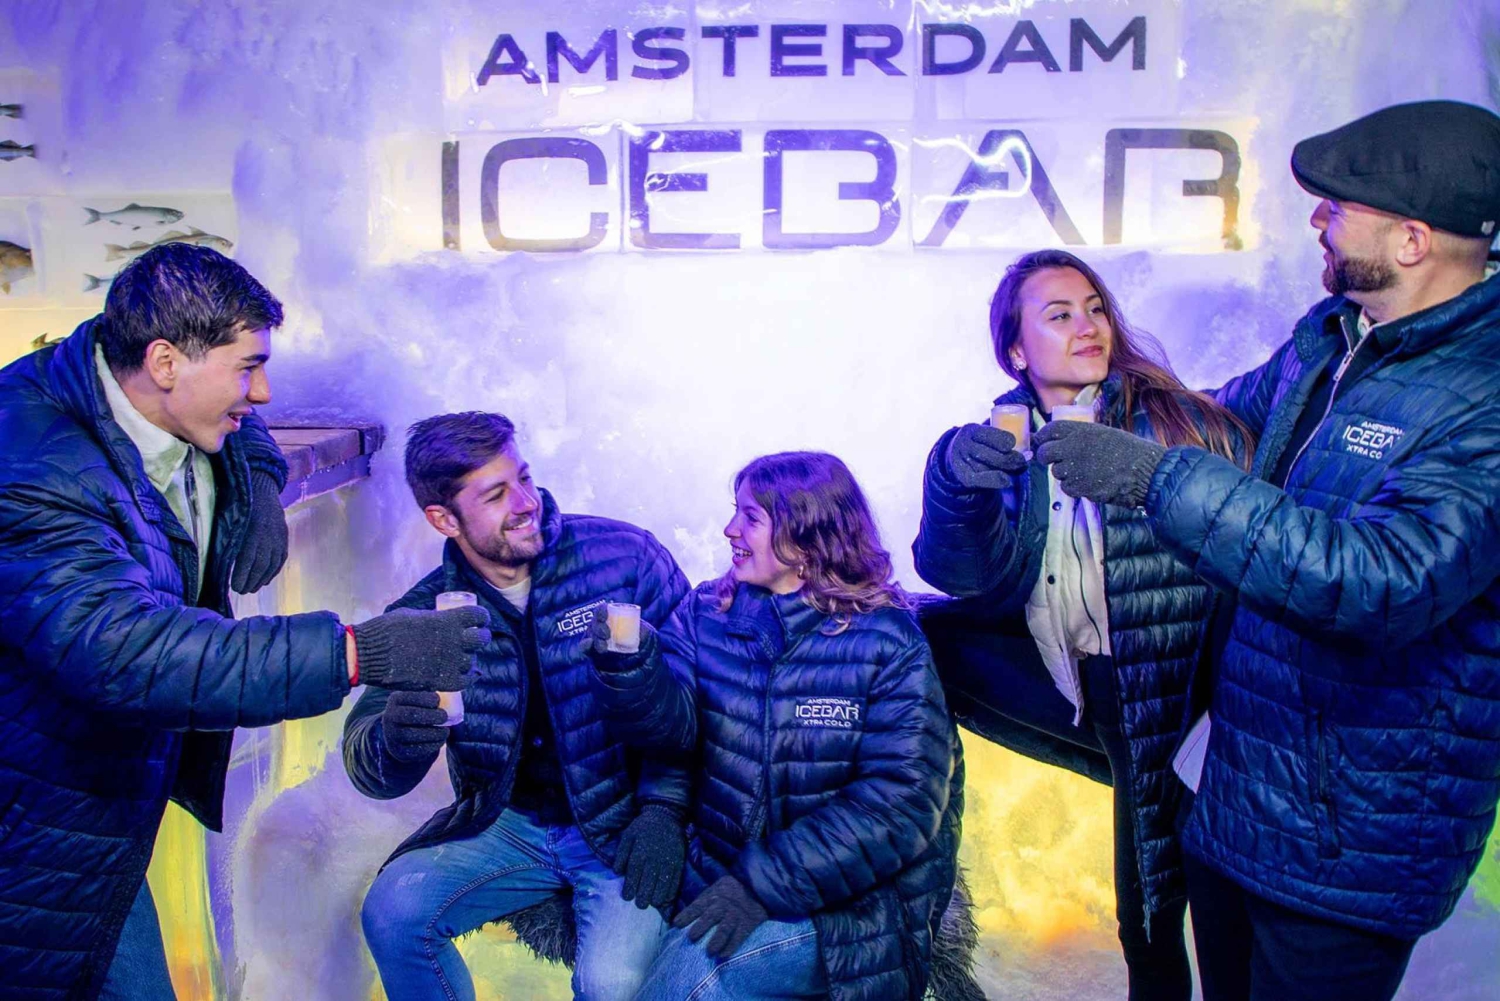 Amsterdam: Amsterdam Icebar and Our House Combo Entry Ticket